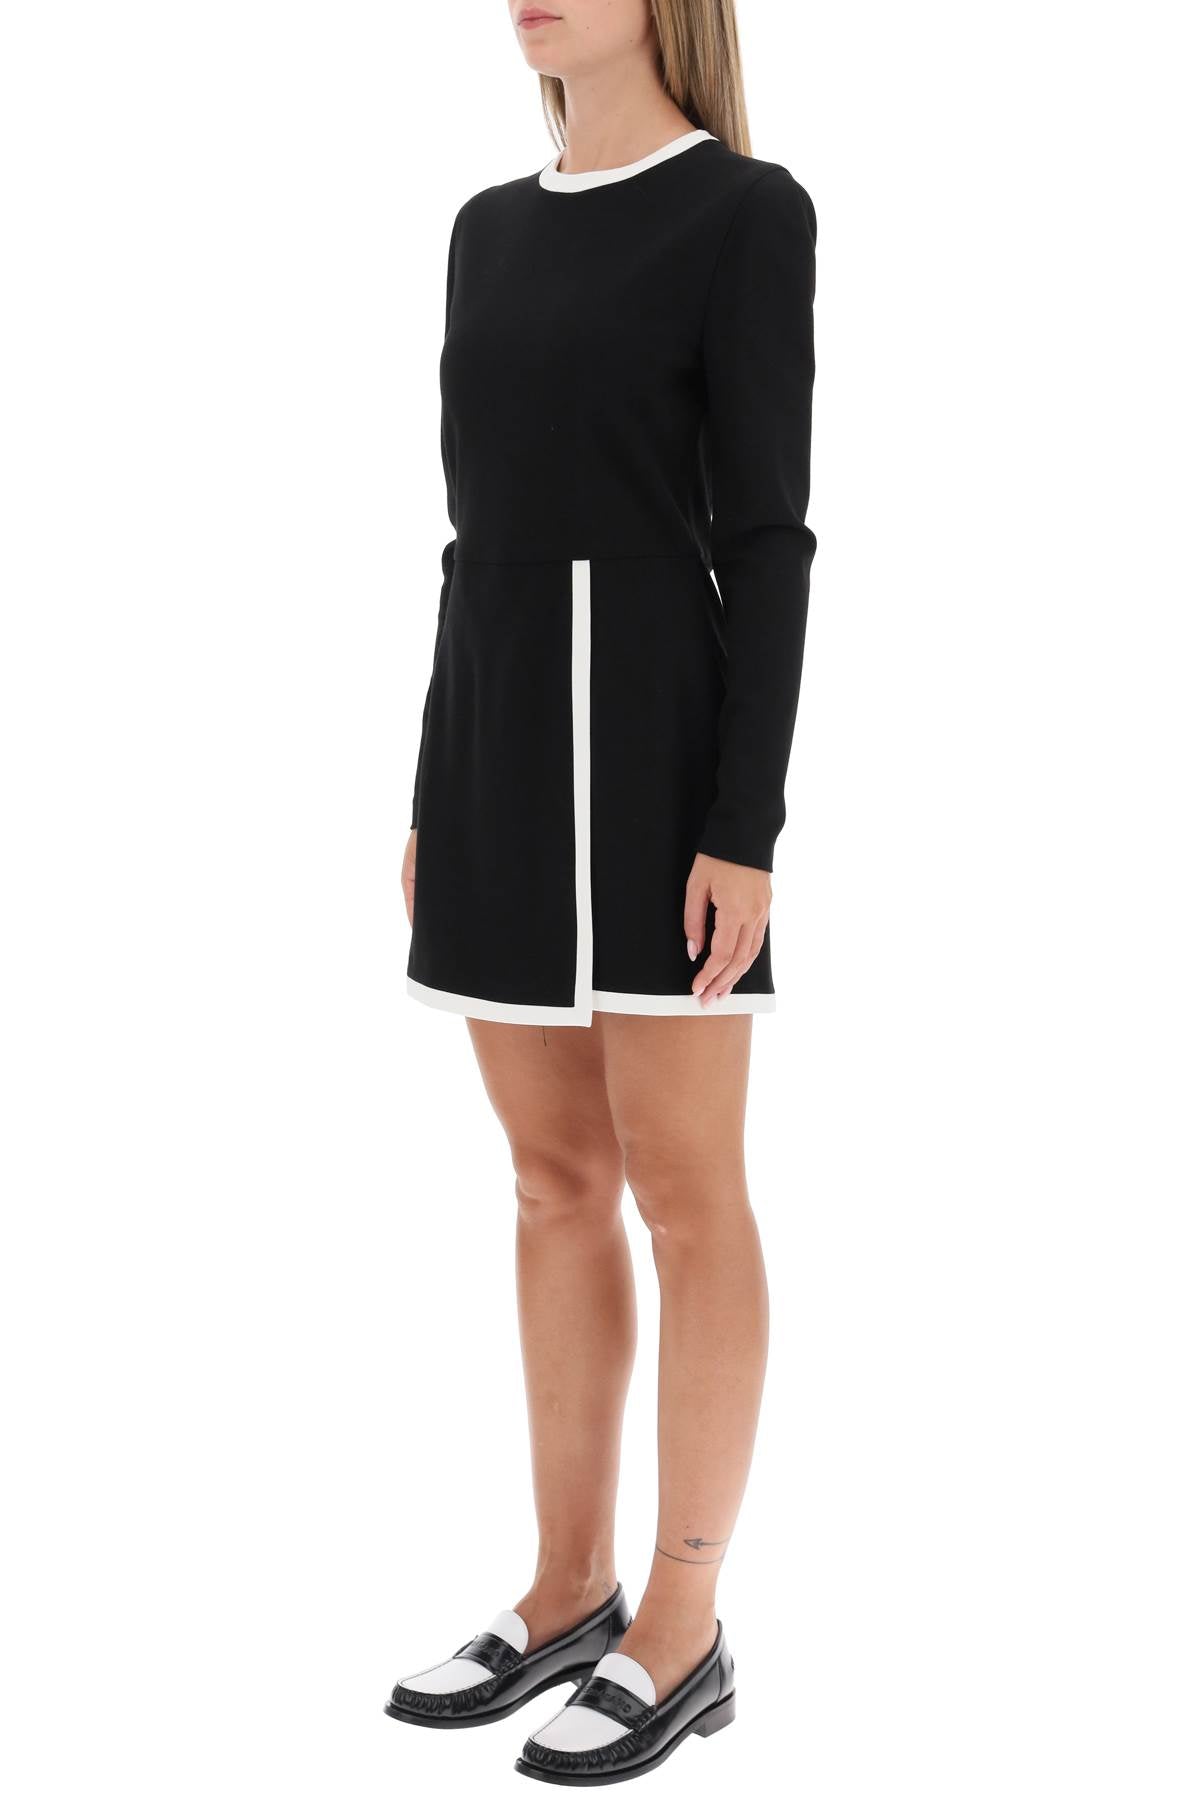 MSGM Msgm playsuit with contrasting detailing